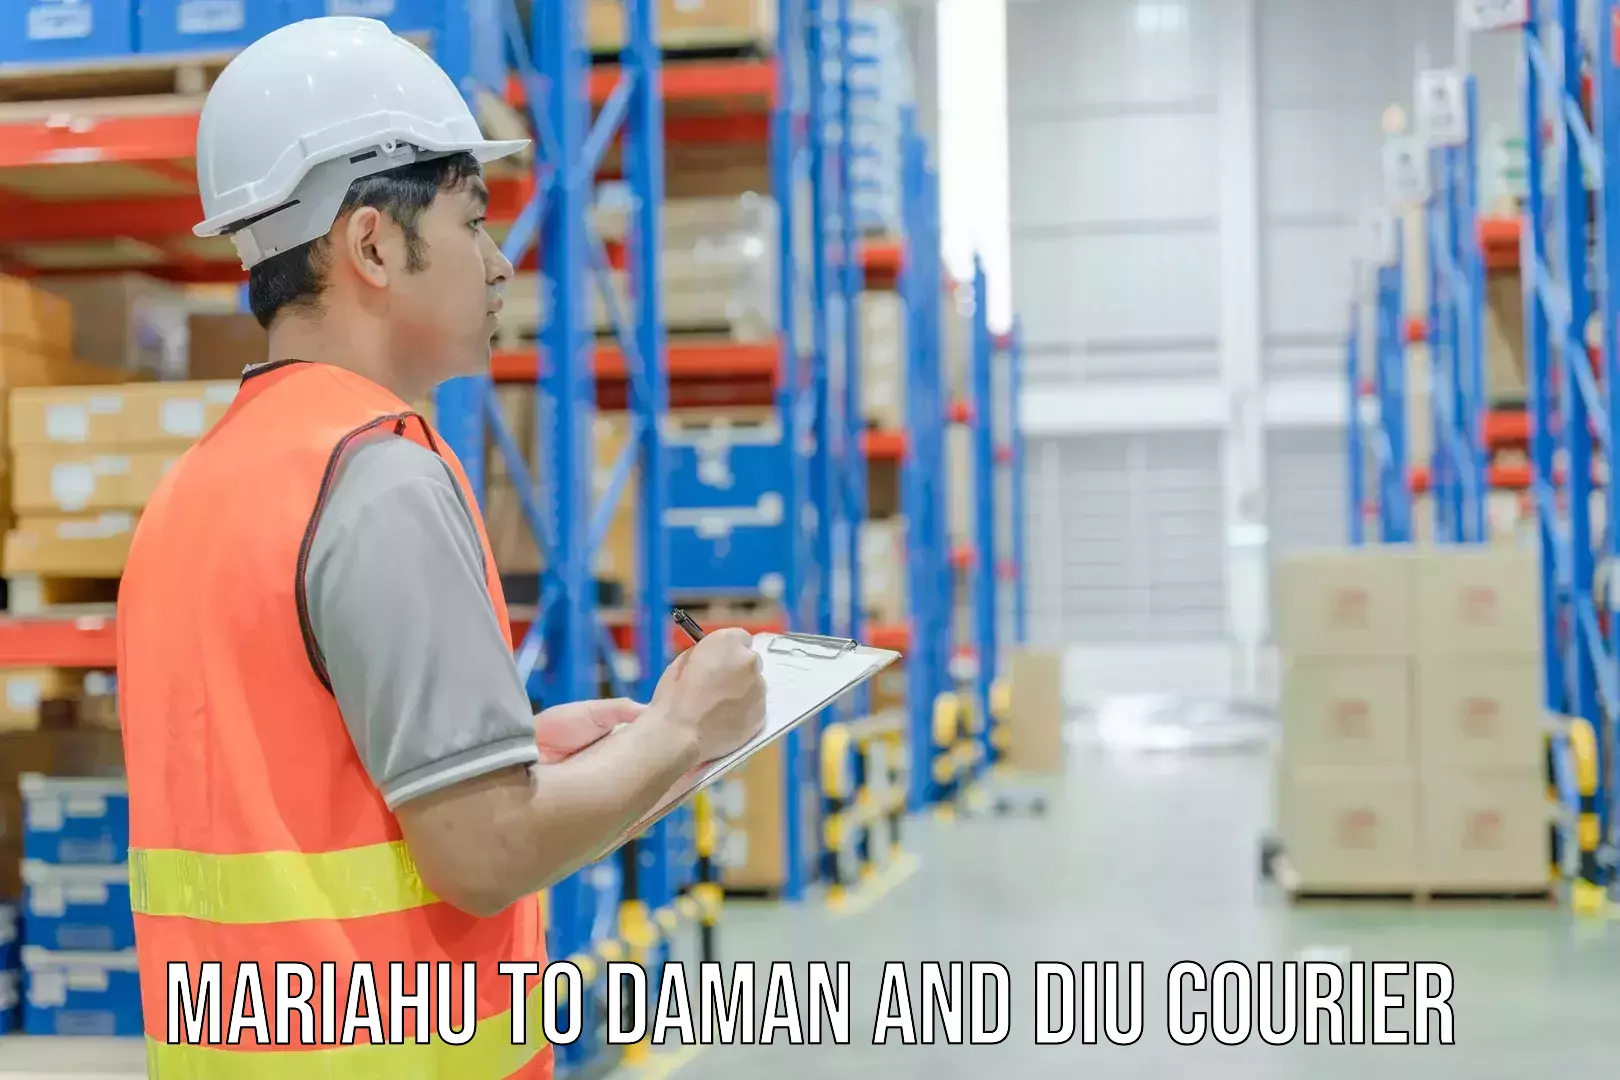 Reliable courier services in Mariahu to Diu